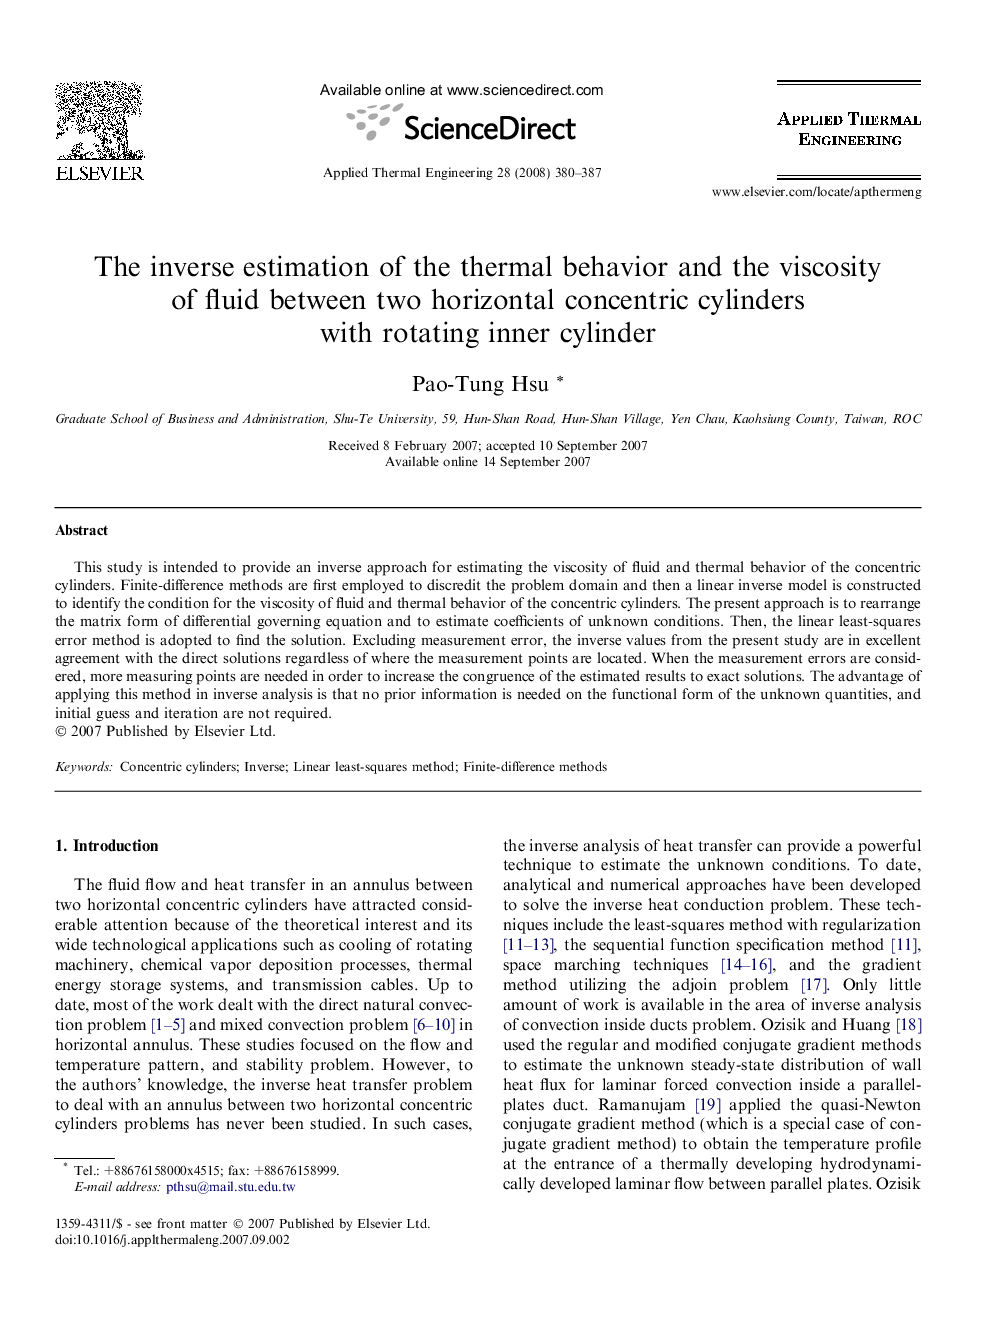 The inverse estimation of the thermal behavior and the viscosity of fluid between two horizontal concentric cylinders with rotating inner cylinder